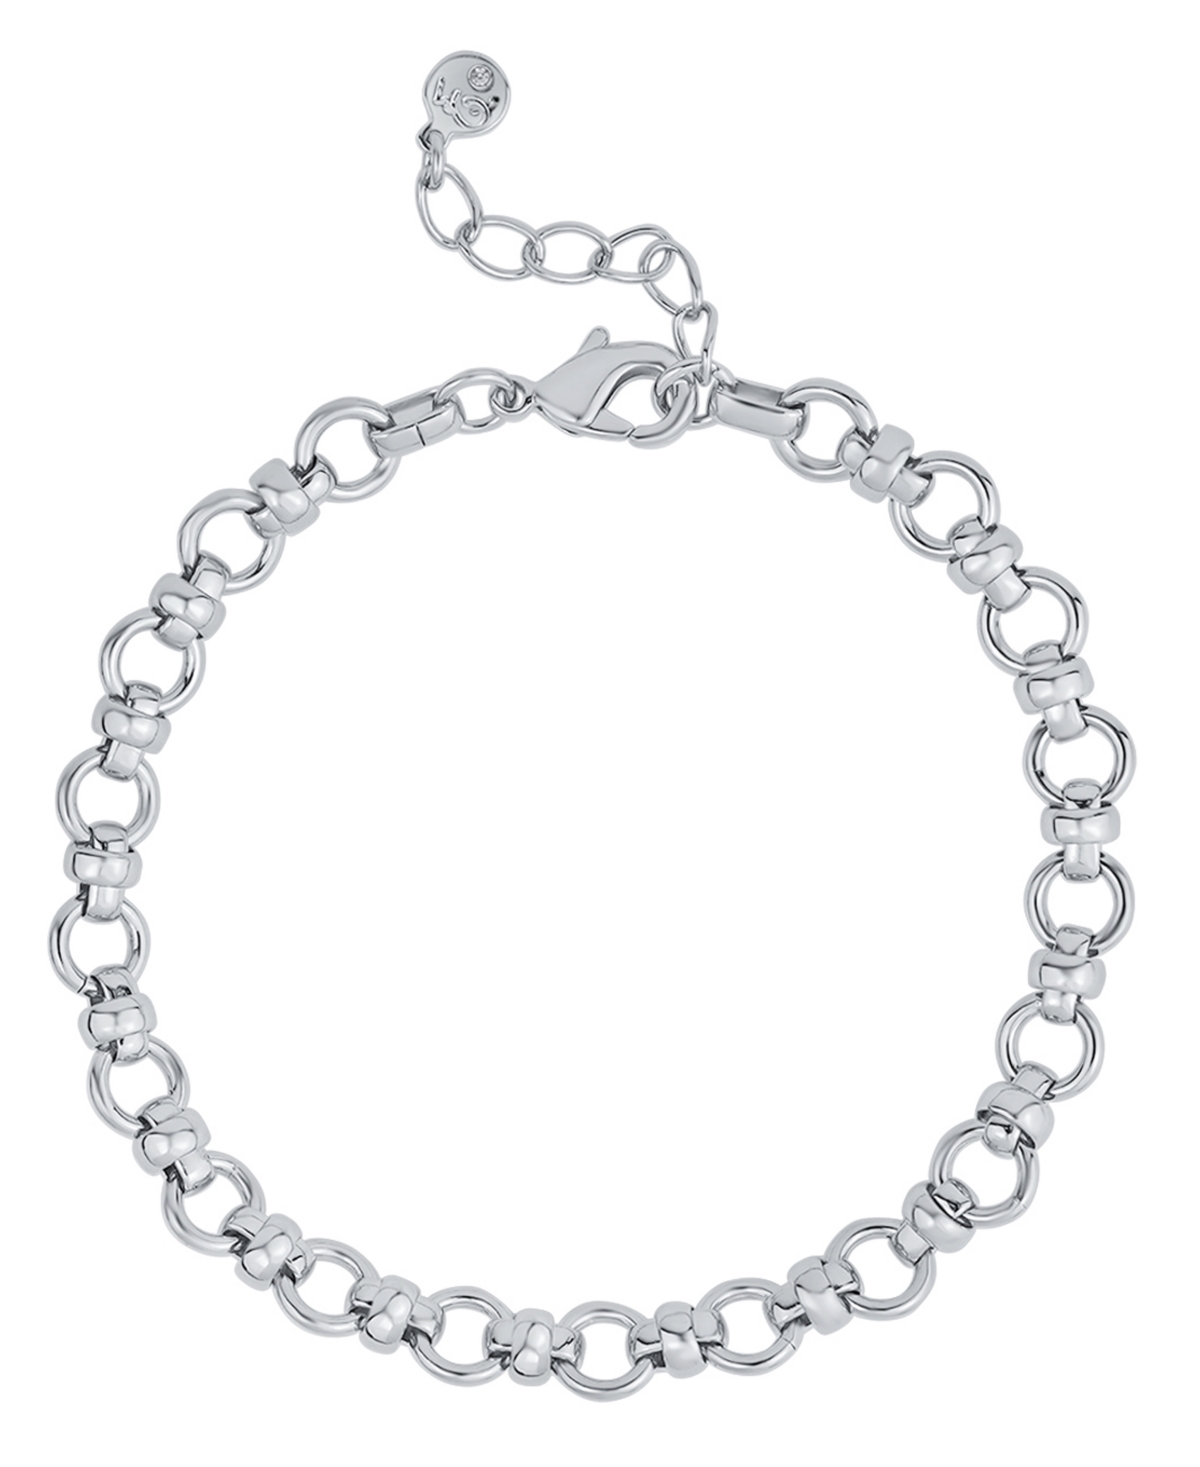 And Now This Fine Silver-plated Or 18k Gold-plated Circle Link Bracelet